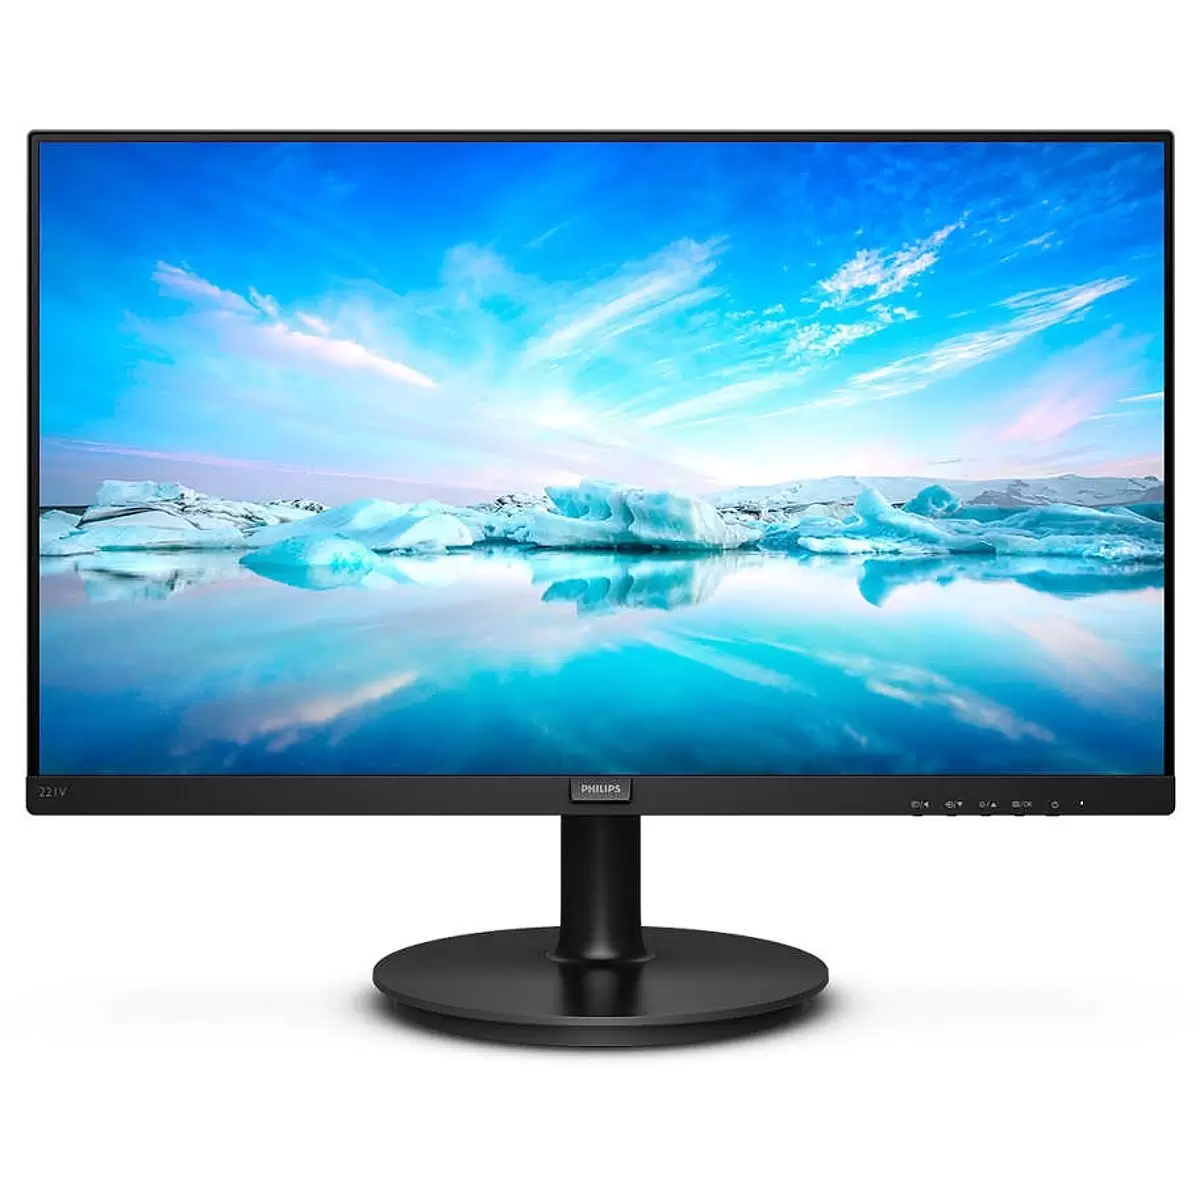 PHILIPS 221V8 00 Monitor 21 5in FHD